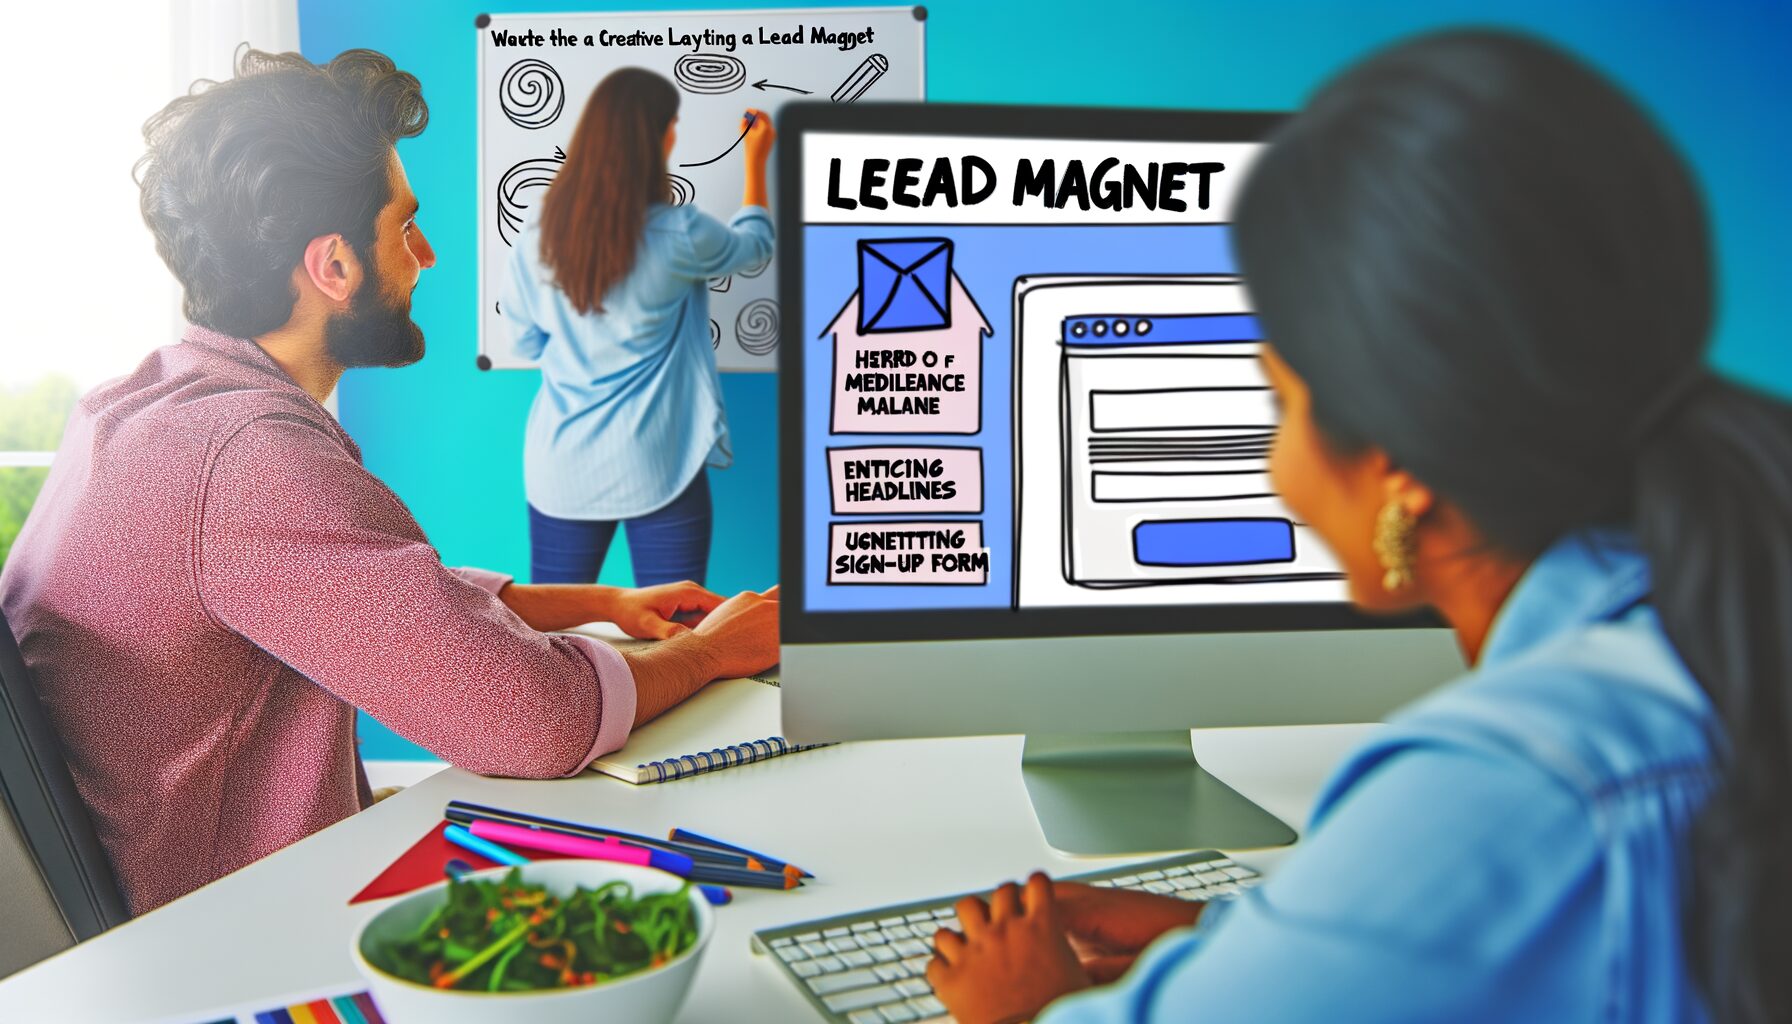 creating lead magnets to encourage email sign ups